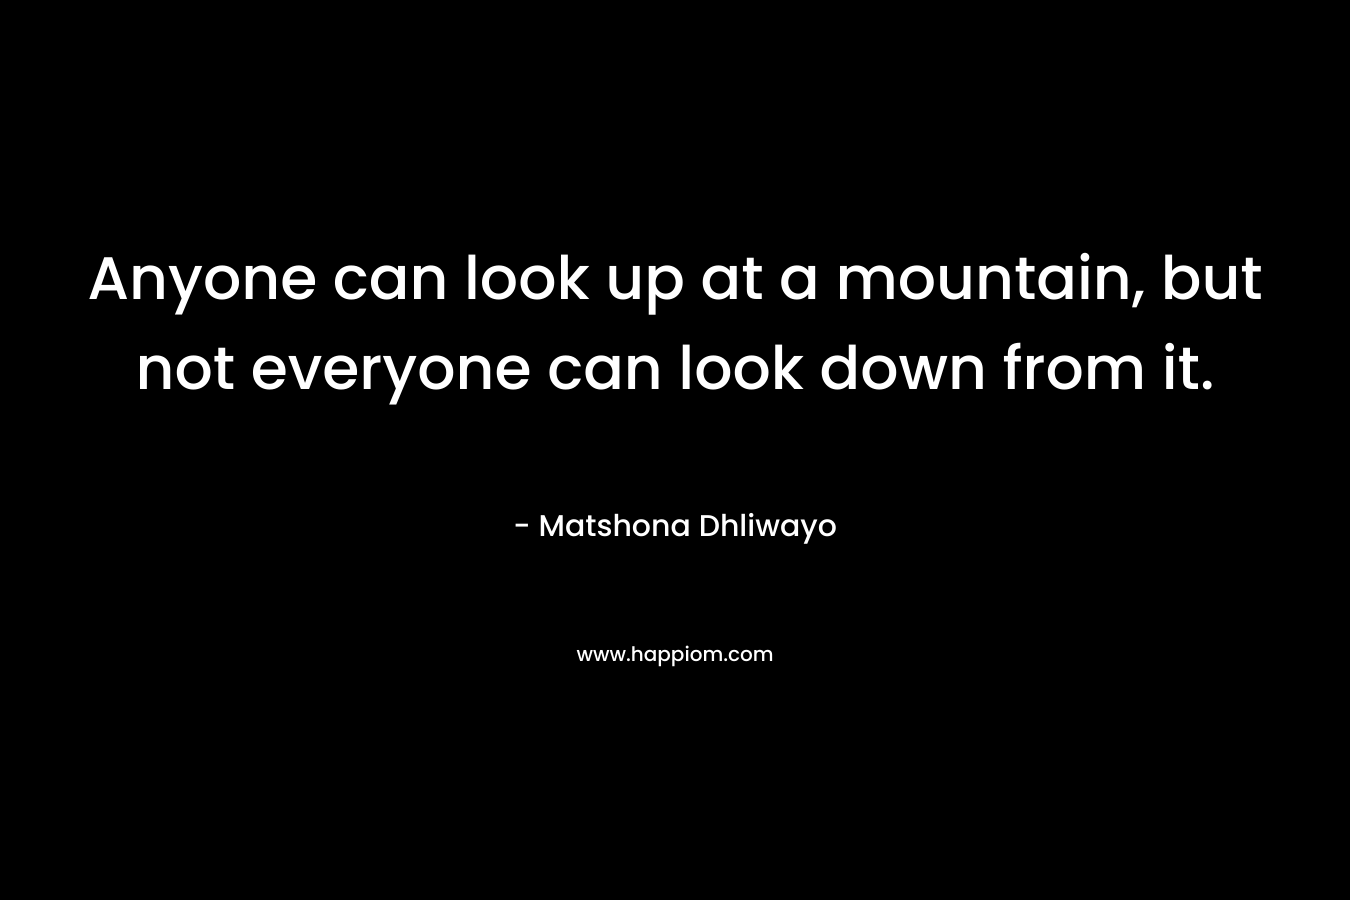 Anyone can look up at a mountain, but not everyone can look down from it.